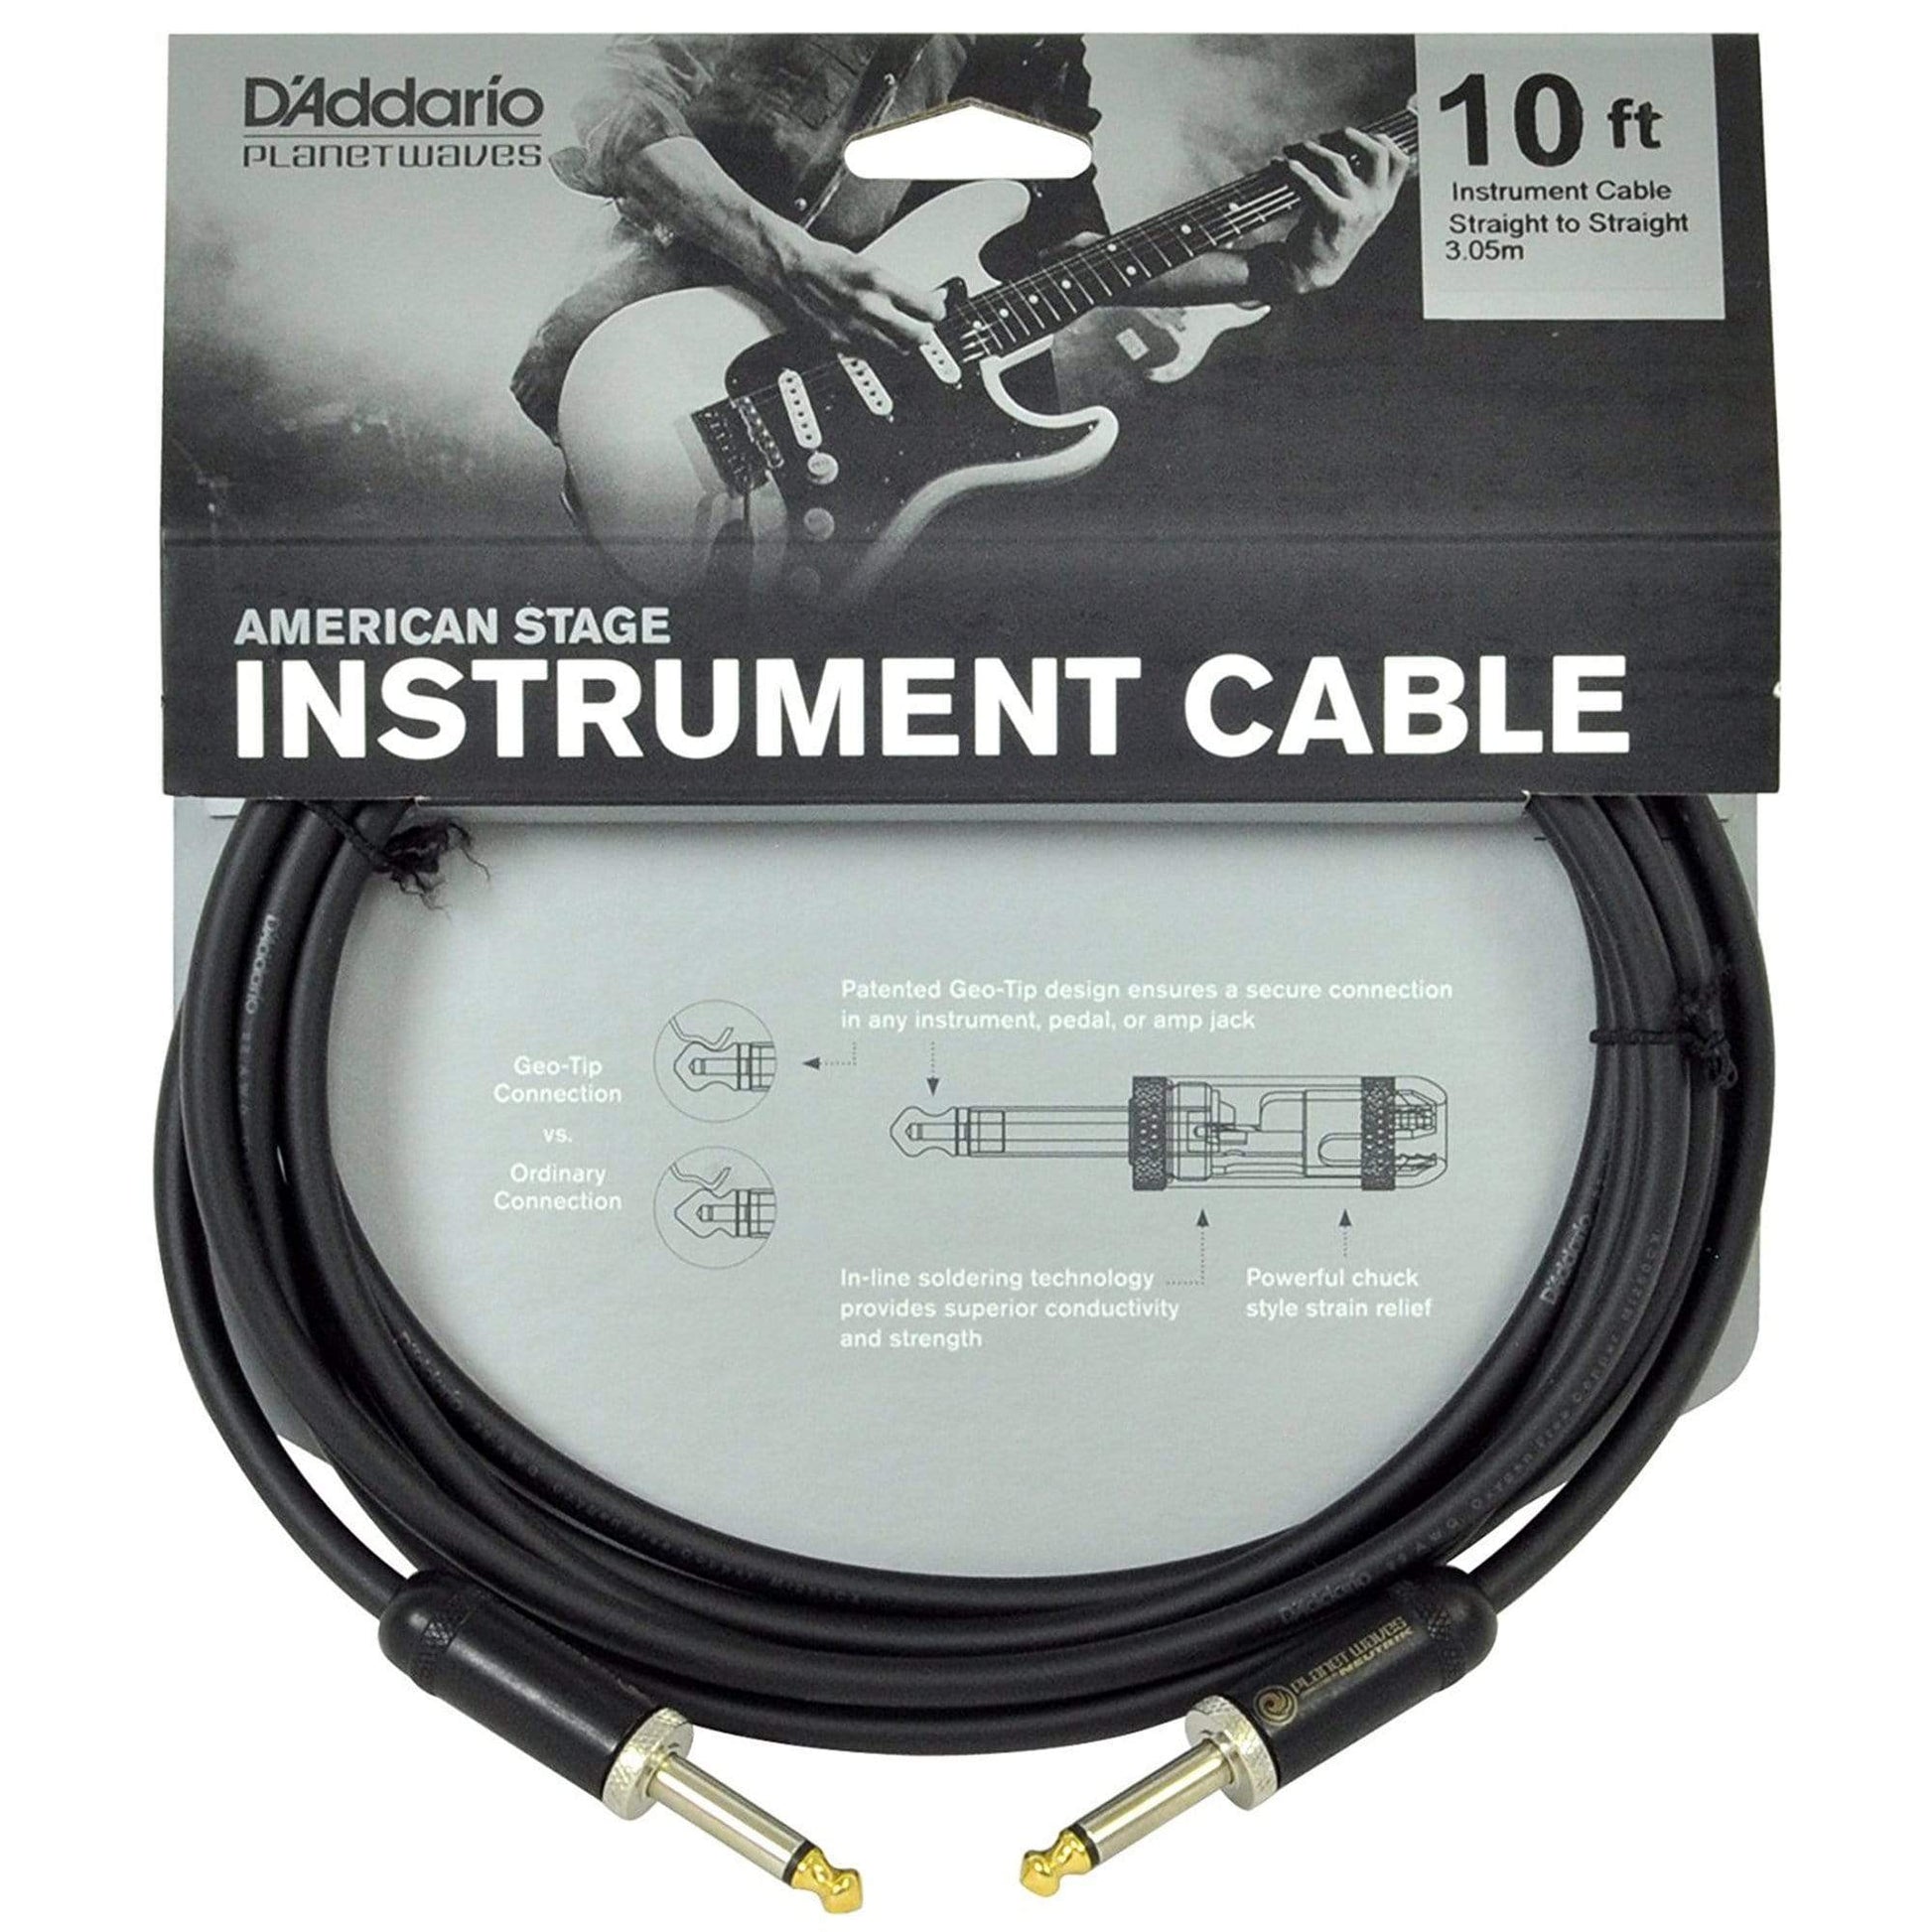 D'Addario American Stage Instrument Cable 10' Accessories / Cables